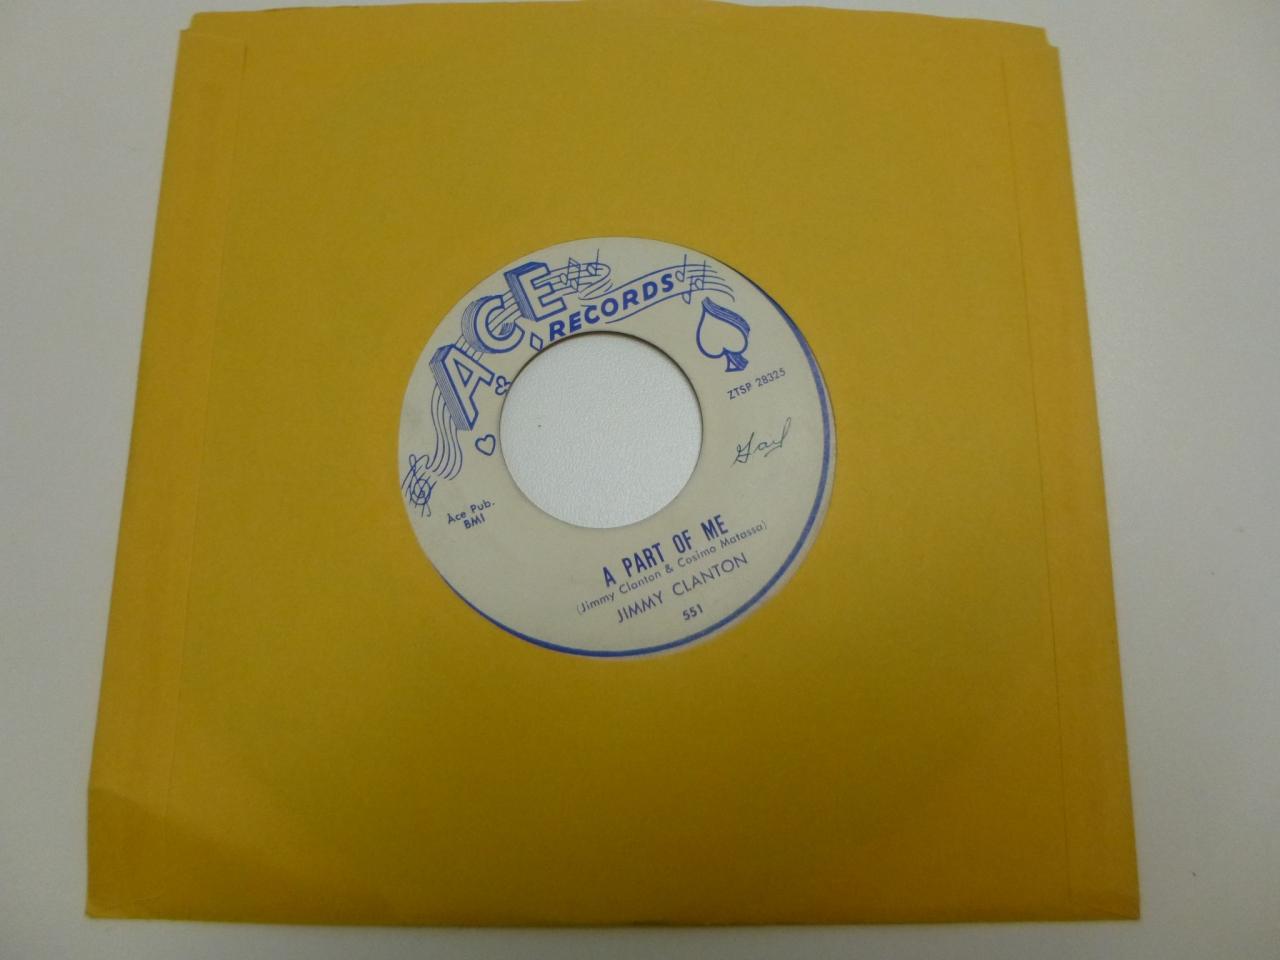 JIMMY CLANTON A Letter To An Angel 45 RPM Record 1